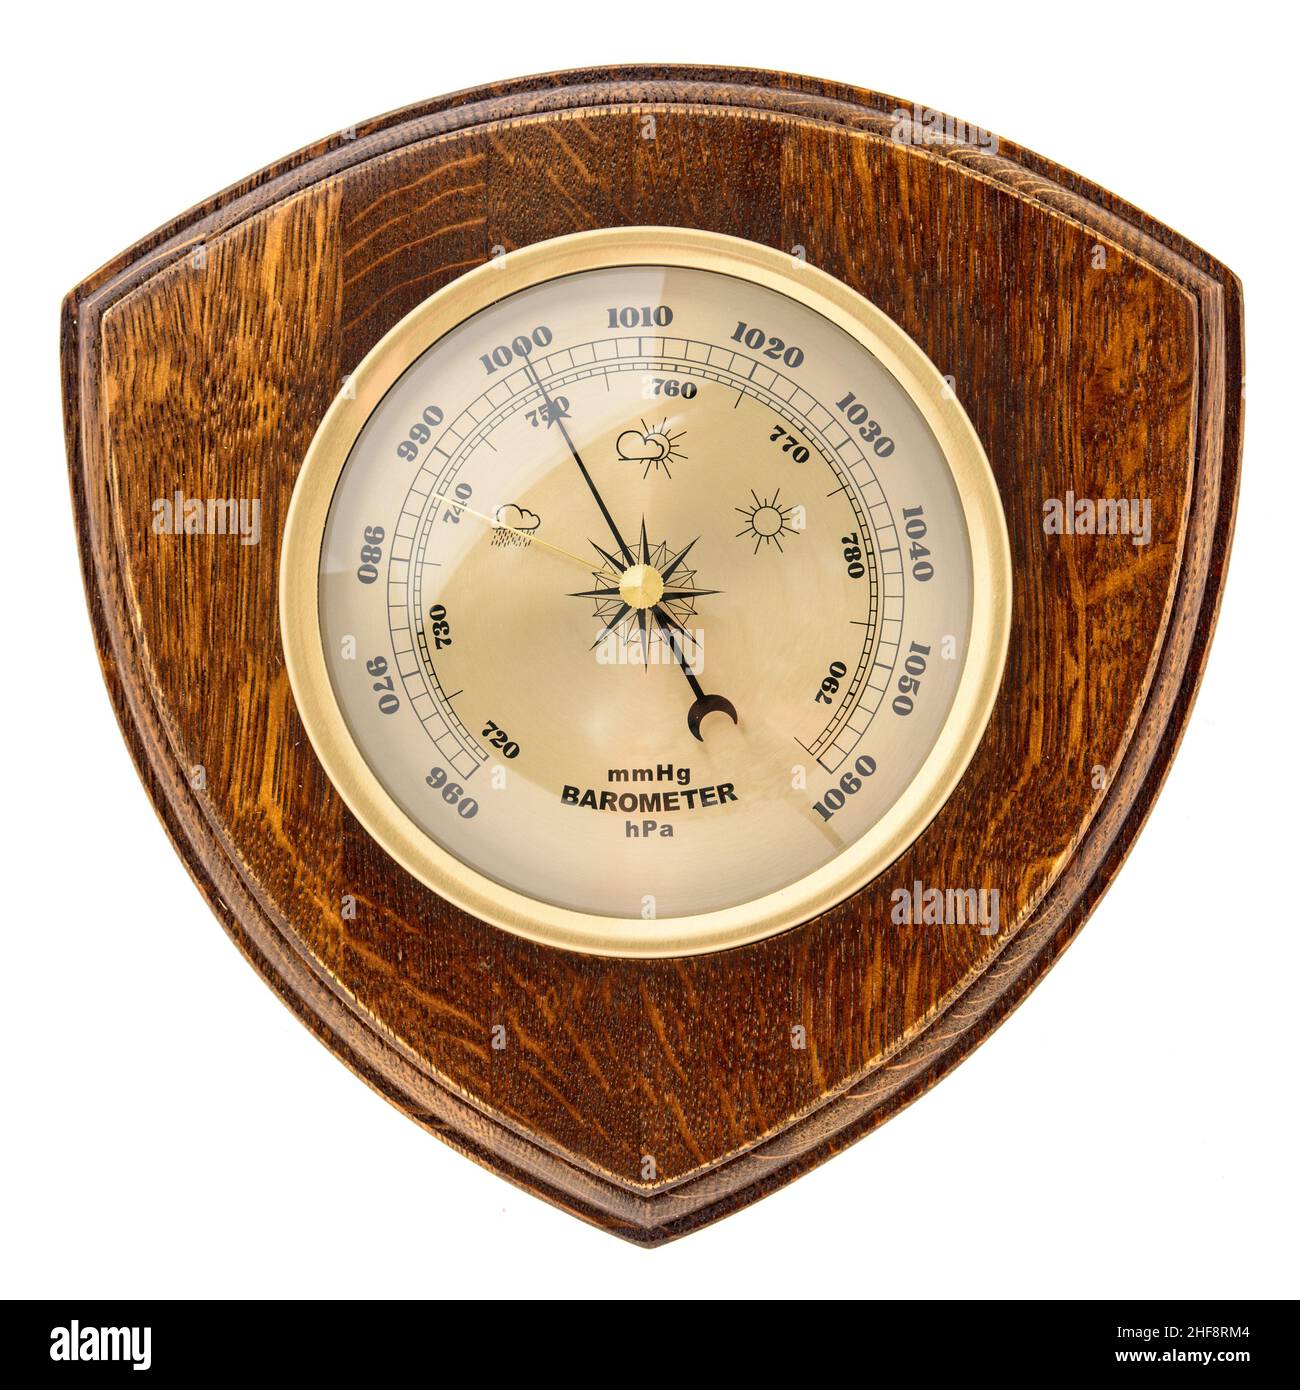 https://c8.alamy.com/comp/2HF8RM4/vintage-wooden-clock-with-barometer-and-old-marine-style-thermometer-on-a-white-background-wall-decor-for-the-interior-2HF8RM4.jpg